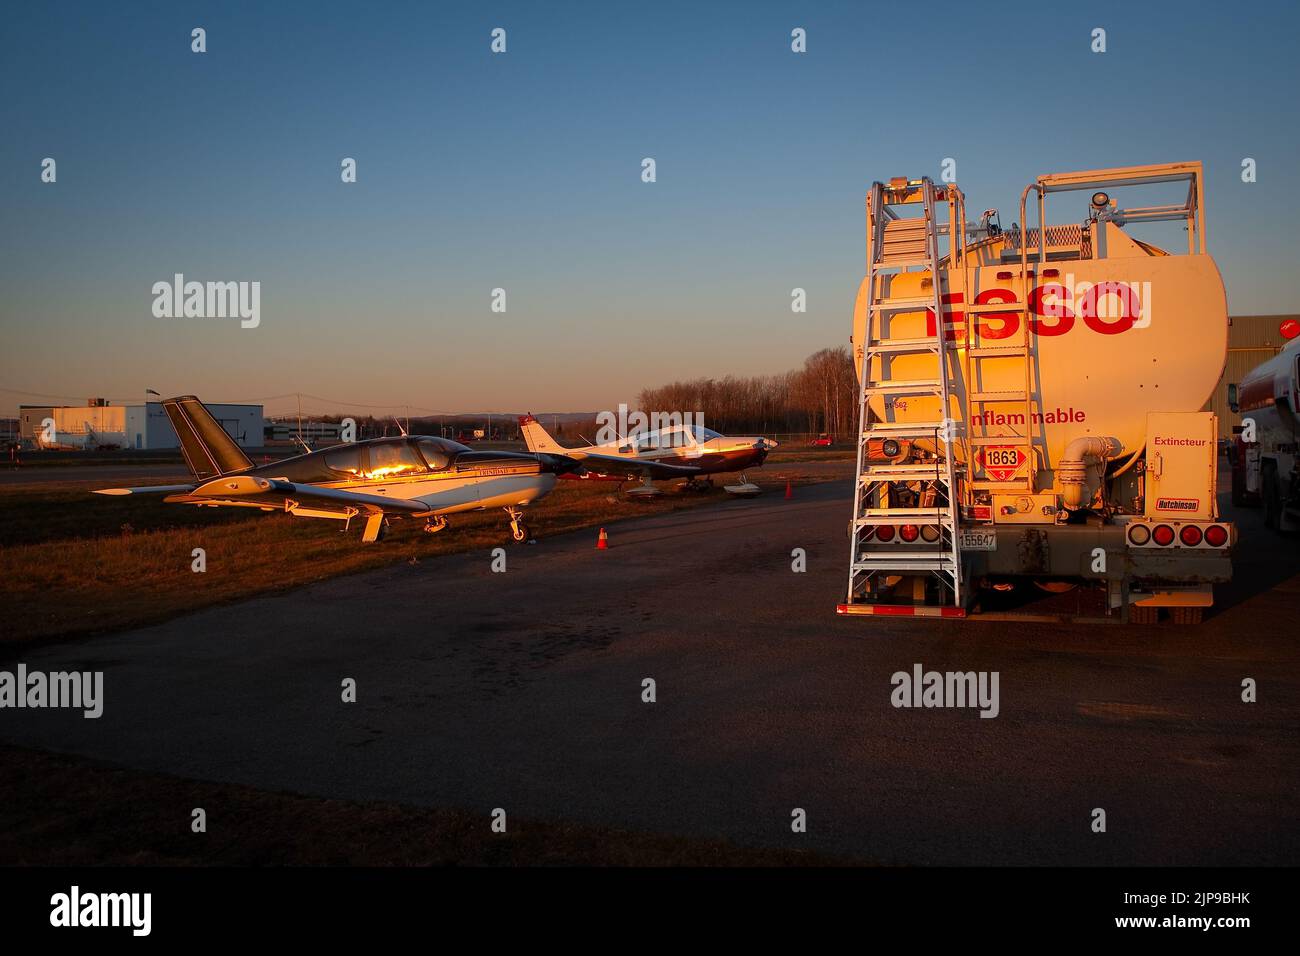 The sun set on a Esso oil truck and two small aircraft at the Quebec City Jean Lesage International Airport, also known as Jean Lesage International Airport (French: Aeroport international Jean-Lesage de Quebec, or Aeroport de Quebec) (IATA: YQB, ICAO: CYQB) November 11, 2009. Stock Photo